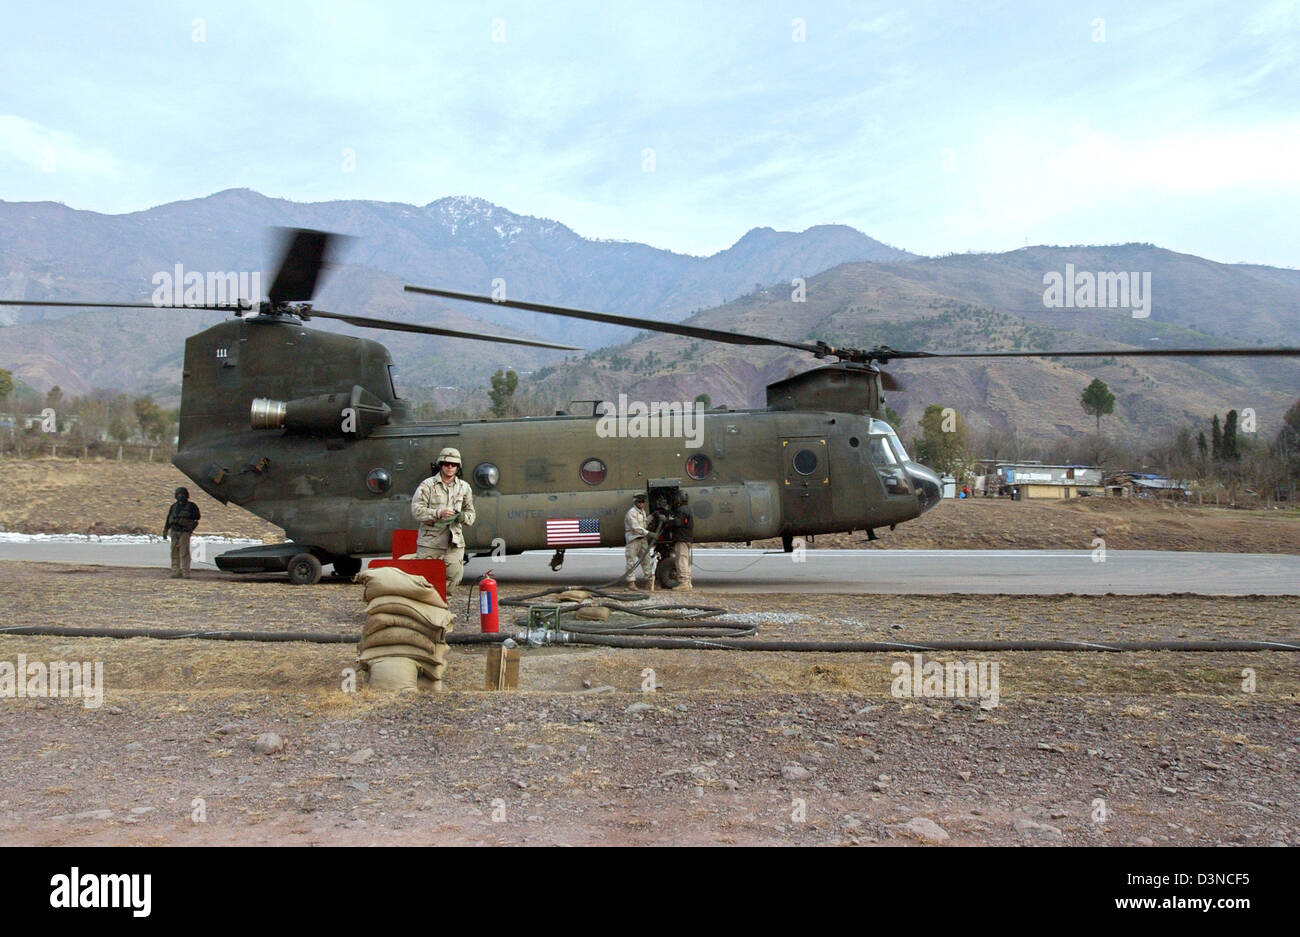 A US chinook helicopter is on stand-by waiting to be loaded with aid supplies near Muzaffarabad in Pakistan, Monday, 30 January 2006. Millions of people suffered in the aftermath of an earthquake which struck in October 2005 hitting the province of Kashmir. Photo: Wolfgang Langenstrassen Stock Photo